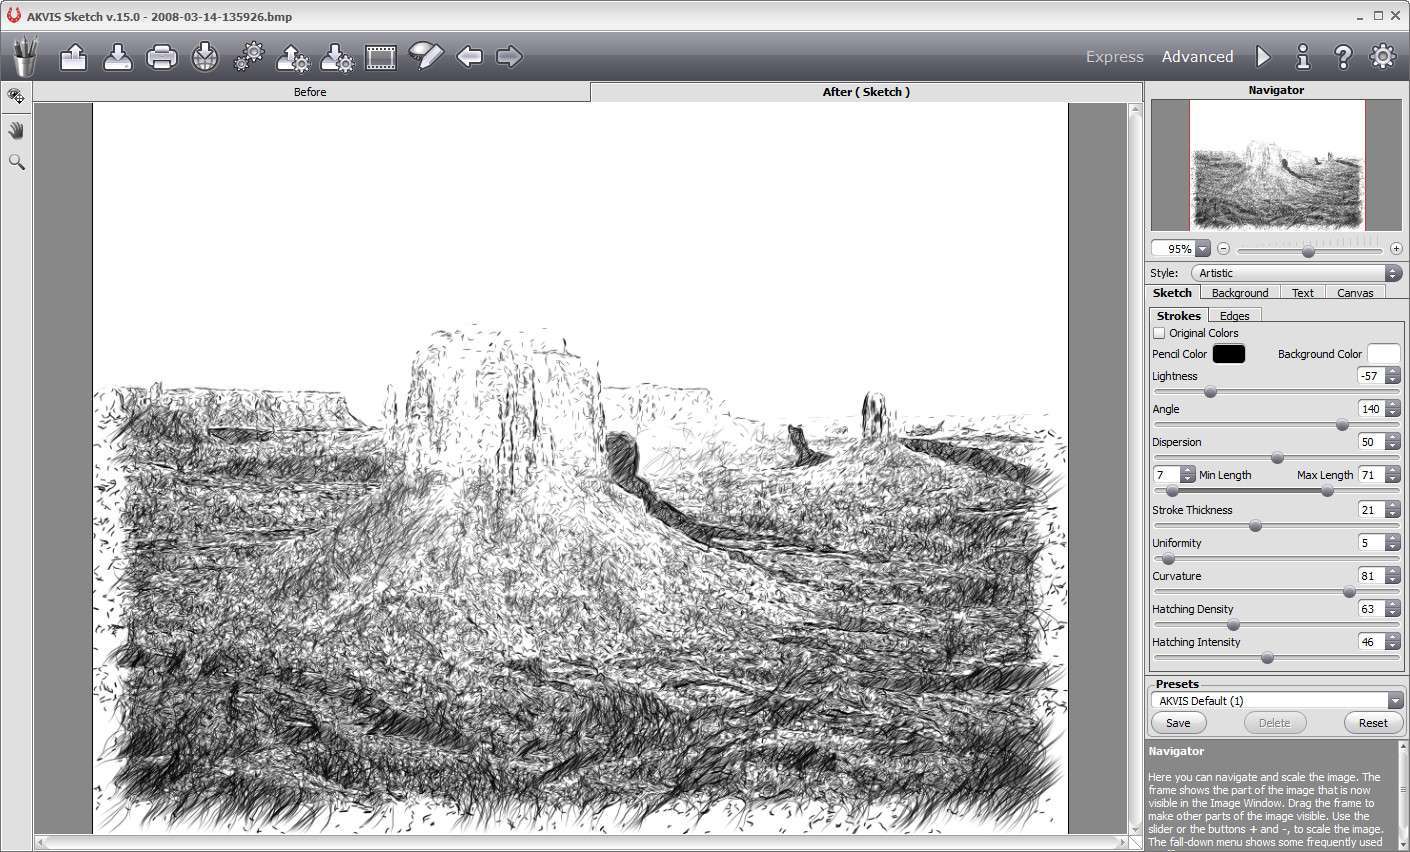 AKVIS Sketch 15.0 : Sketch with Artistic Style